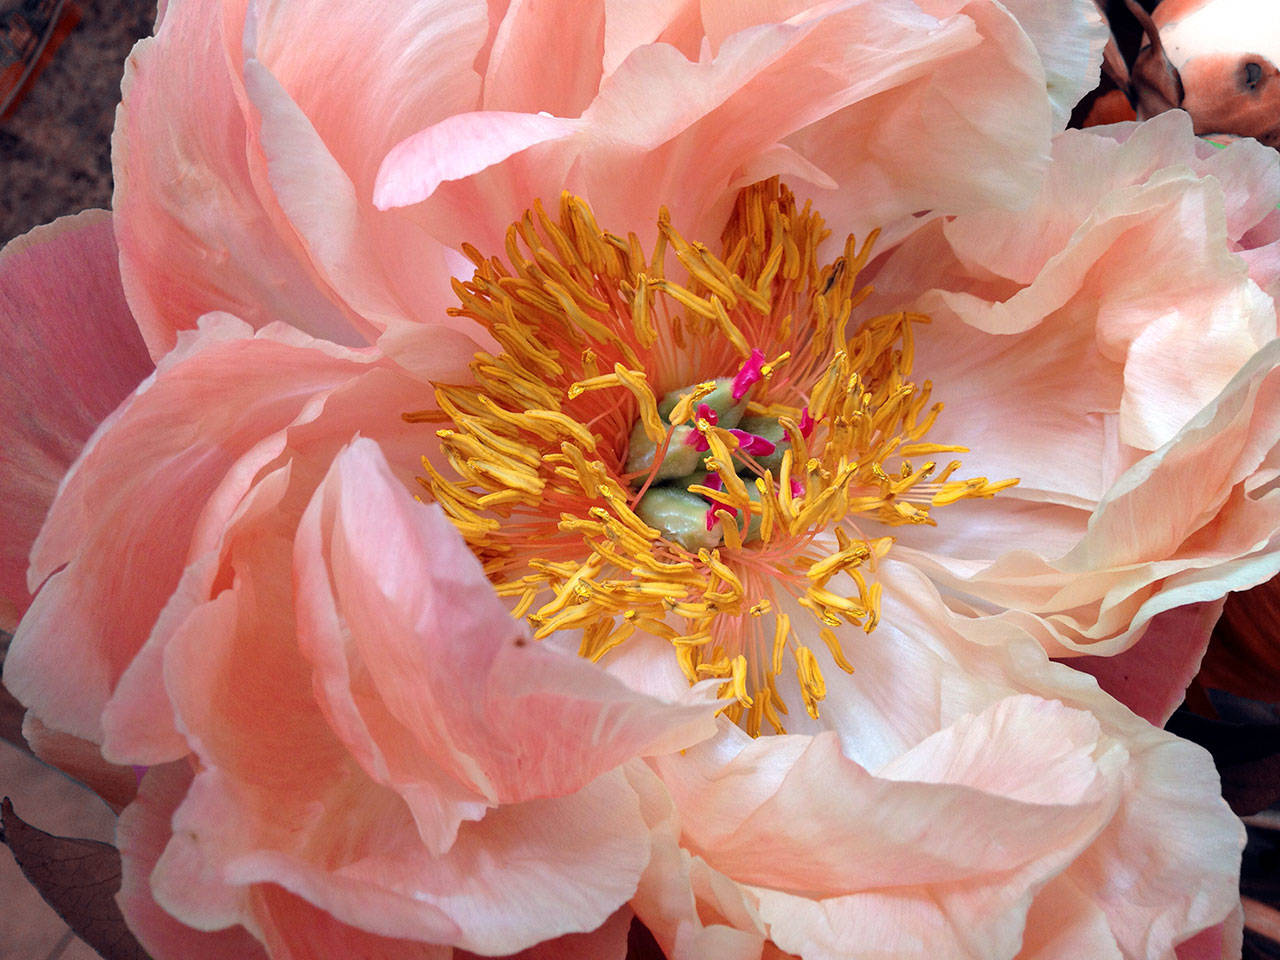 Learn about peony varieties and their care with Jean Pier at the Work to Learn Party in the Sequim Botanical Garden on Saturday. (Renne Emiko Brock)